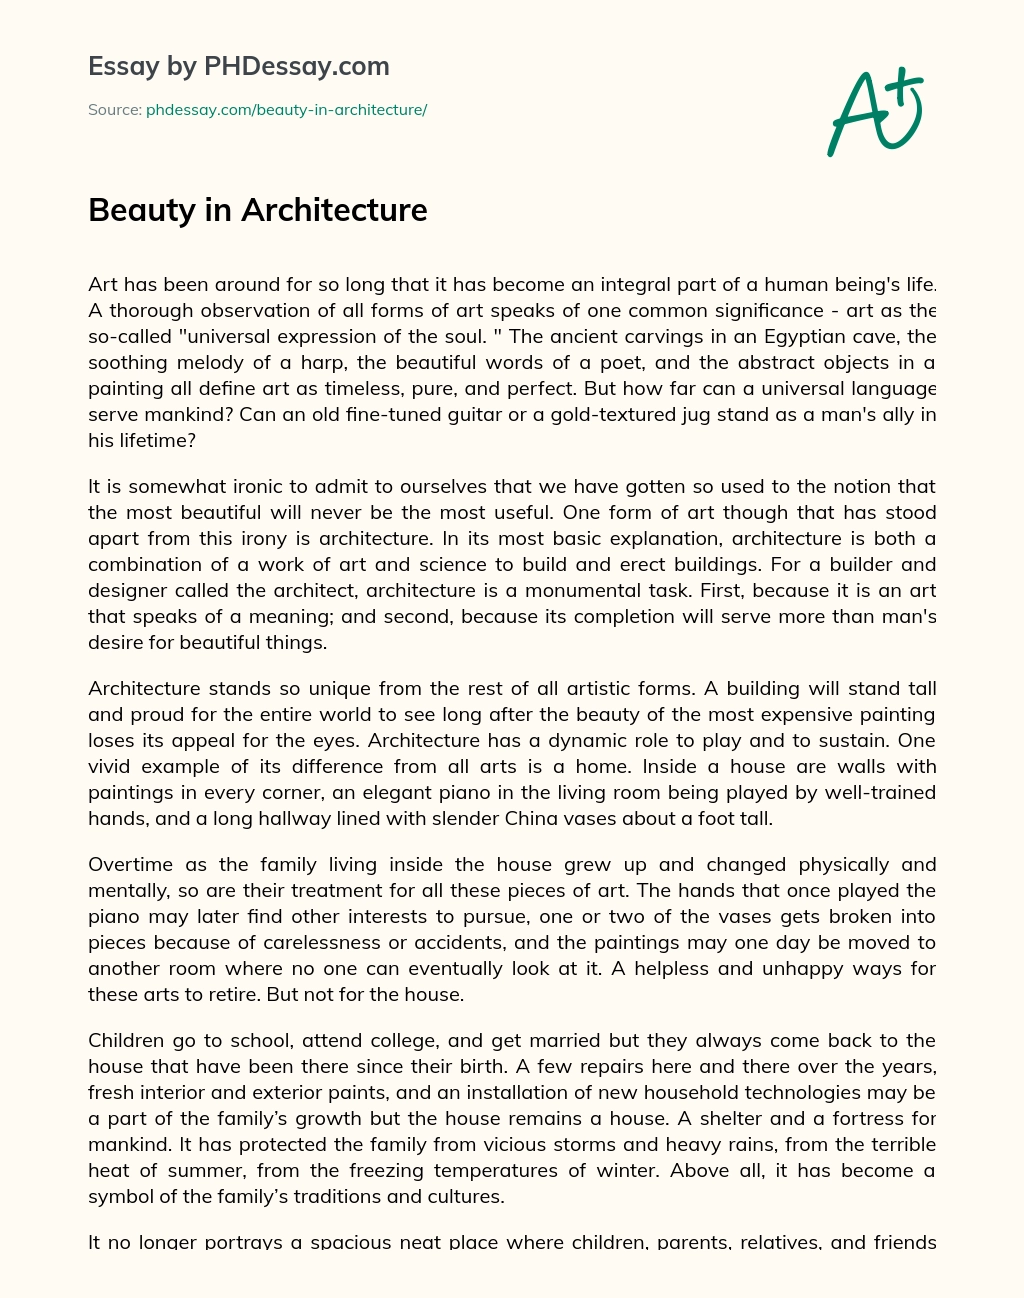 Beauty in Architecture essay